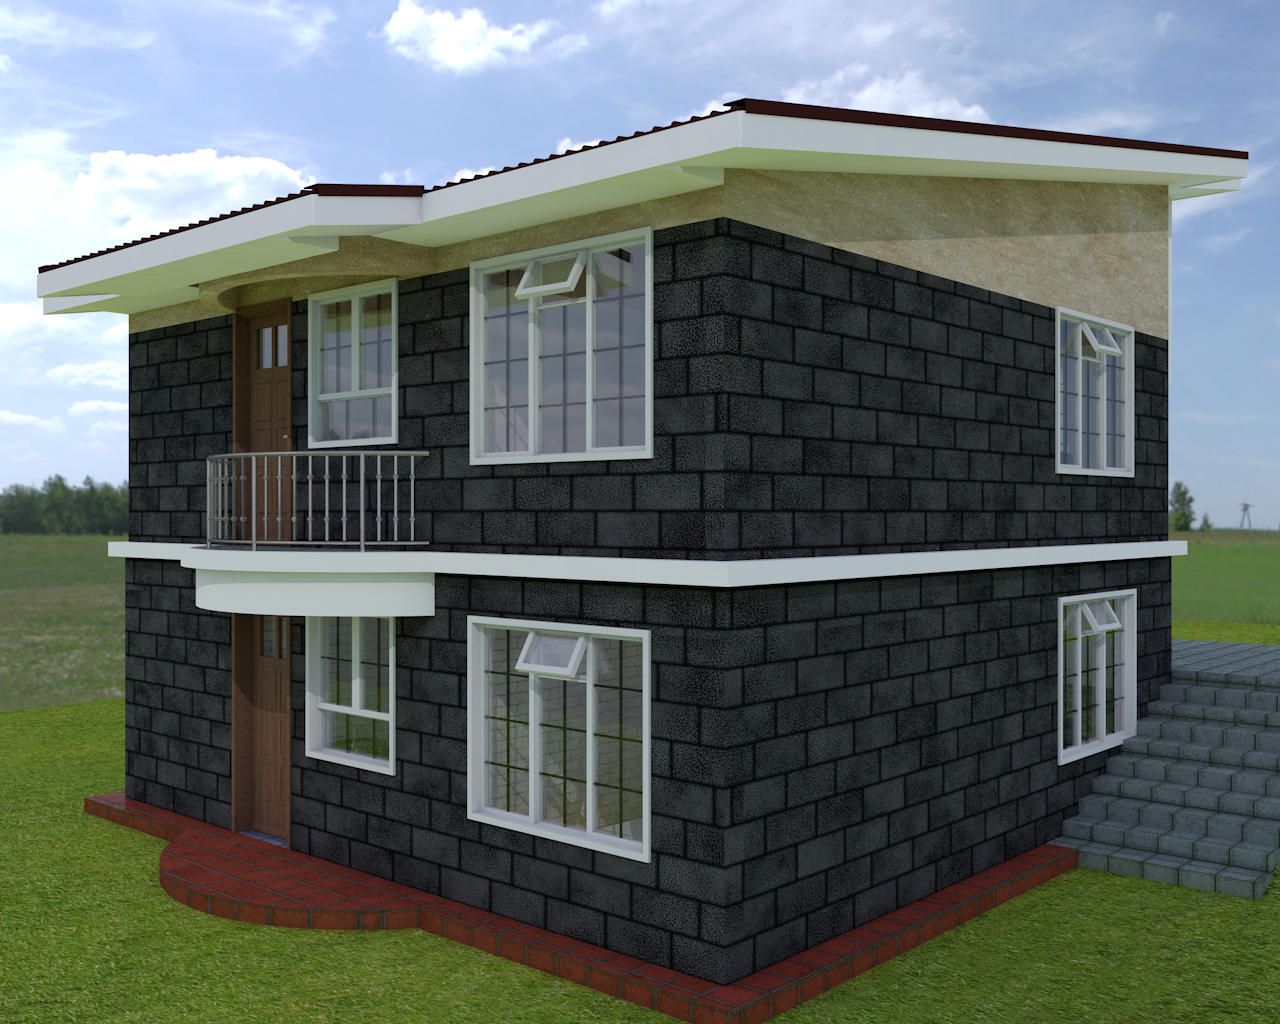 A Two Storey House Plan Consisting of Two Bedrooms Units